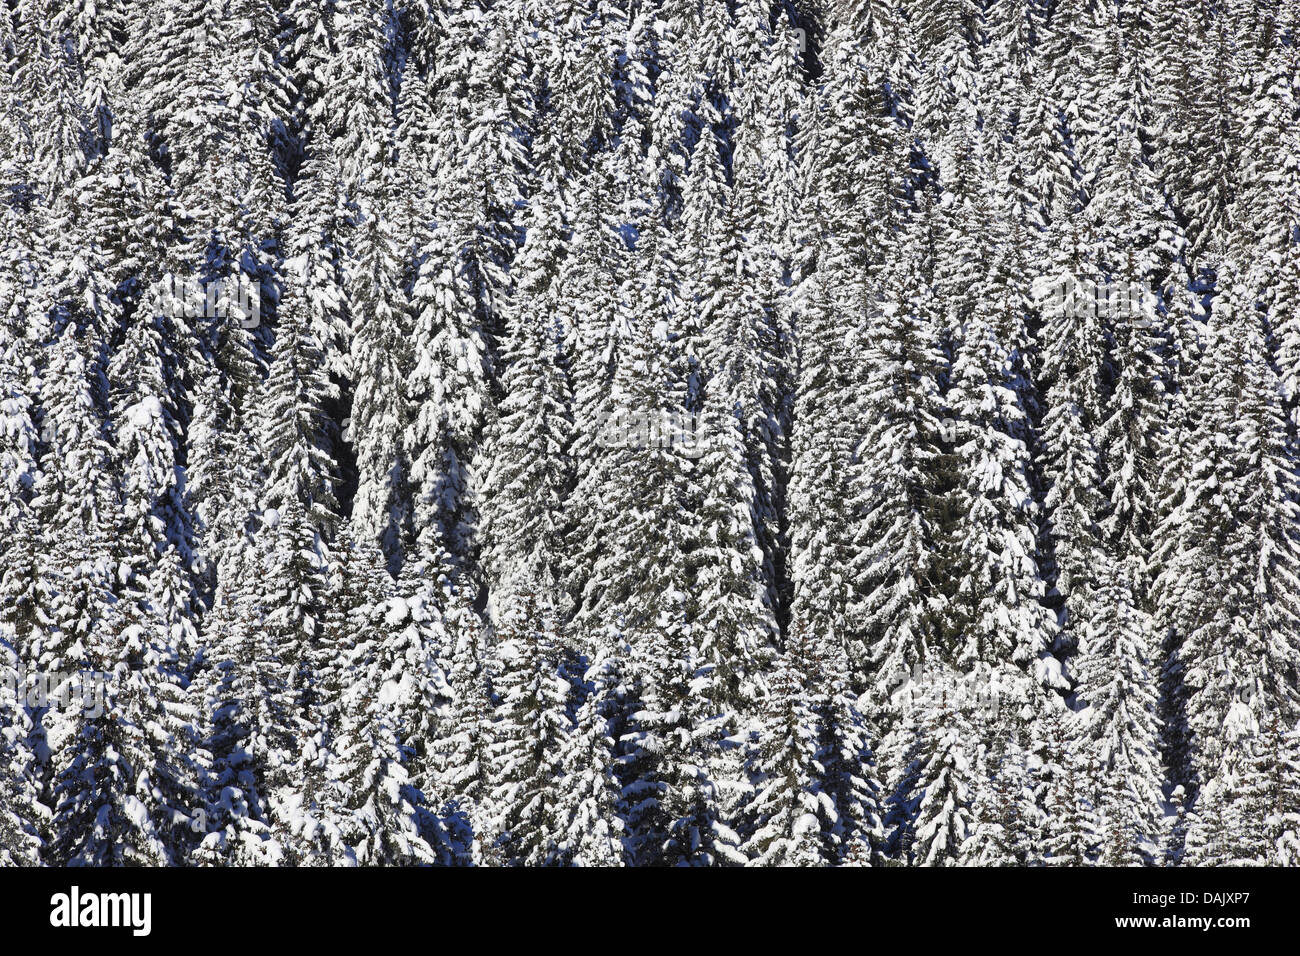 Norway spruce (Picea abies), view from above on a snow-covered forest, Switzerland Stock Photo